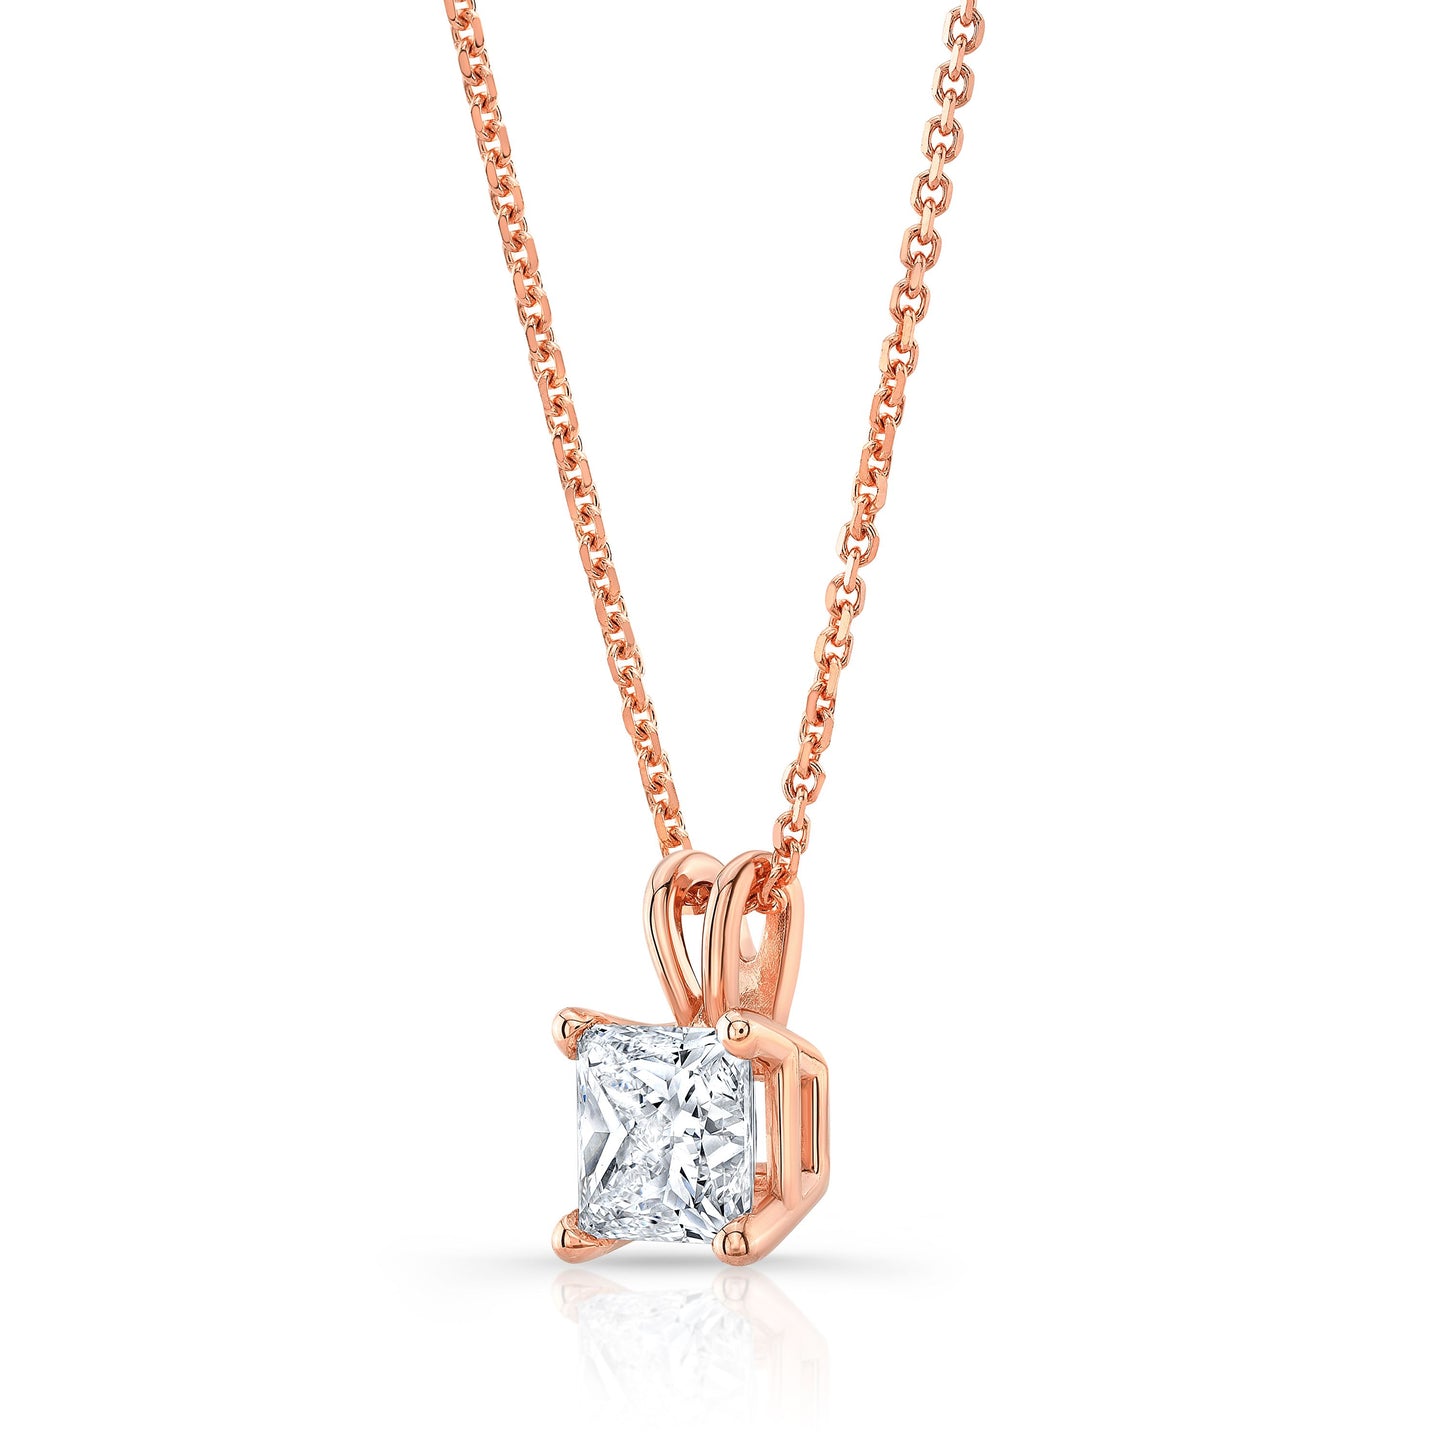 Princess Diamond Solitaire Pendant In A 14k Rose Gold 4-prong Basket Setting, 1.5ct. T.w. (hi, Si1-si2)